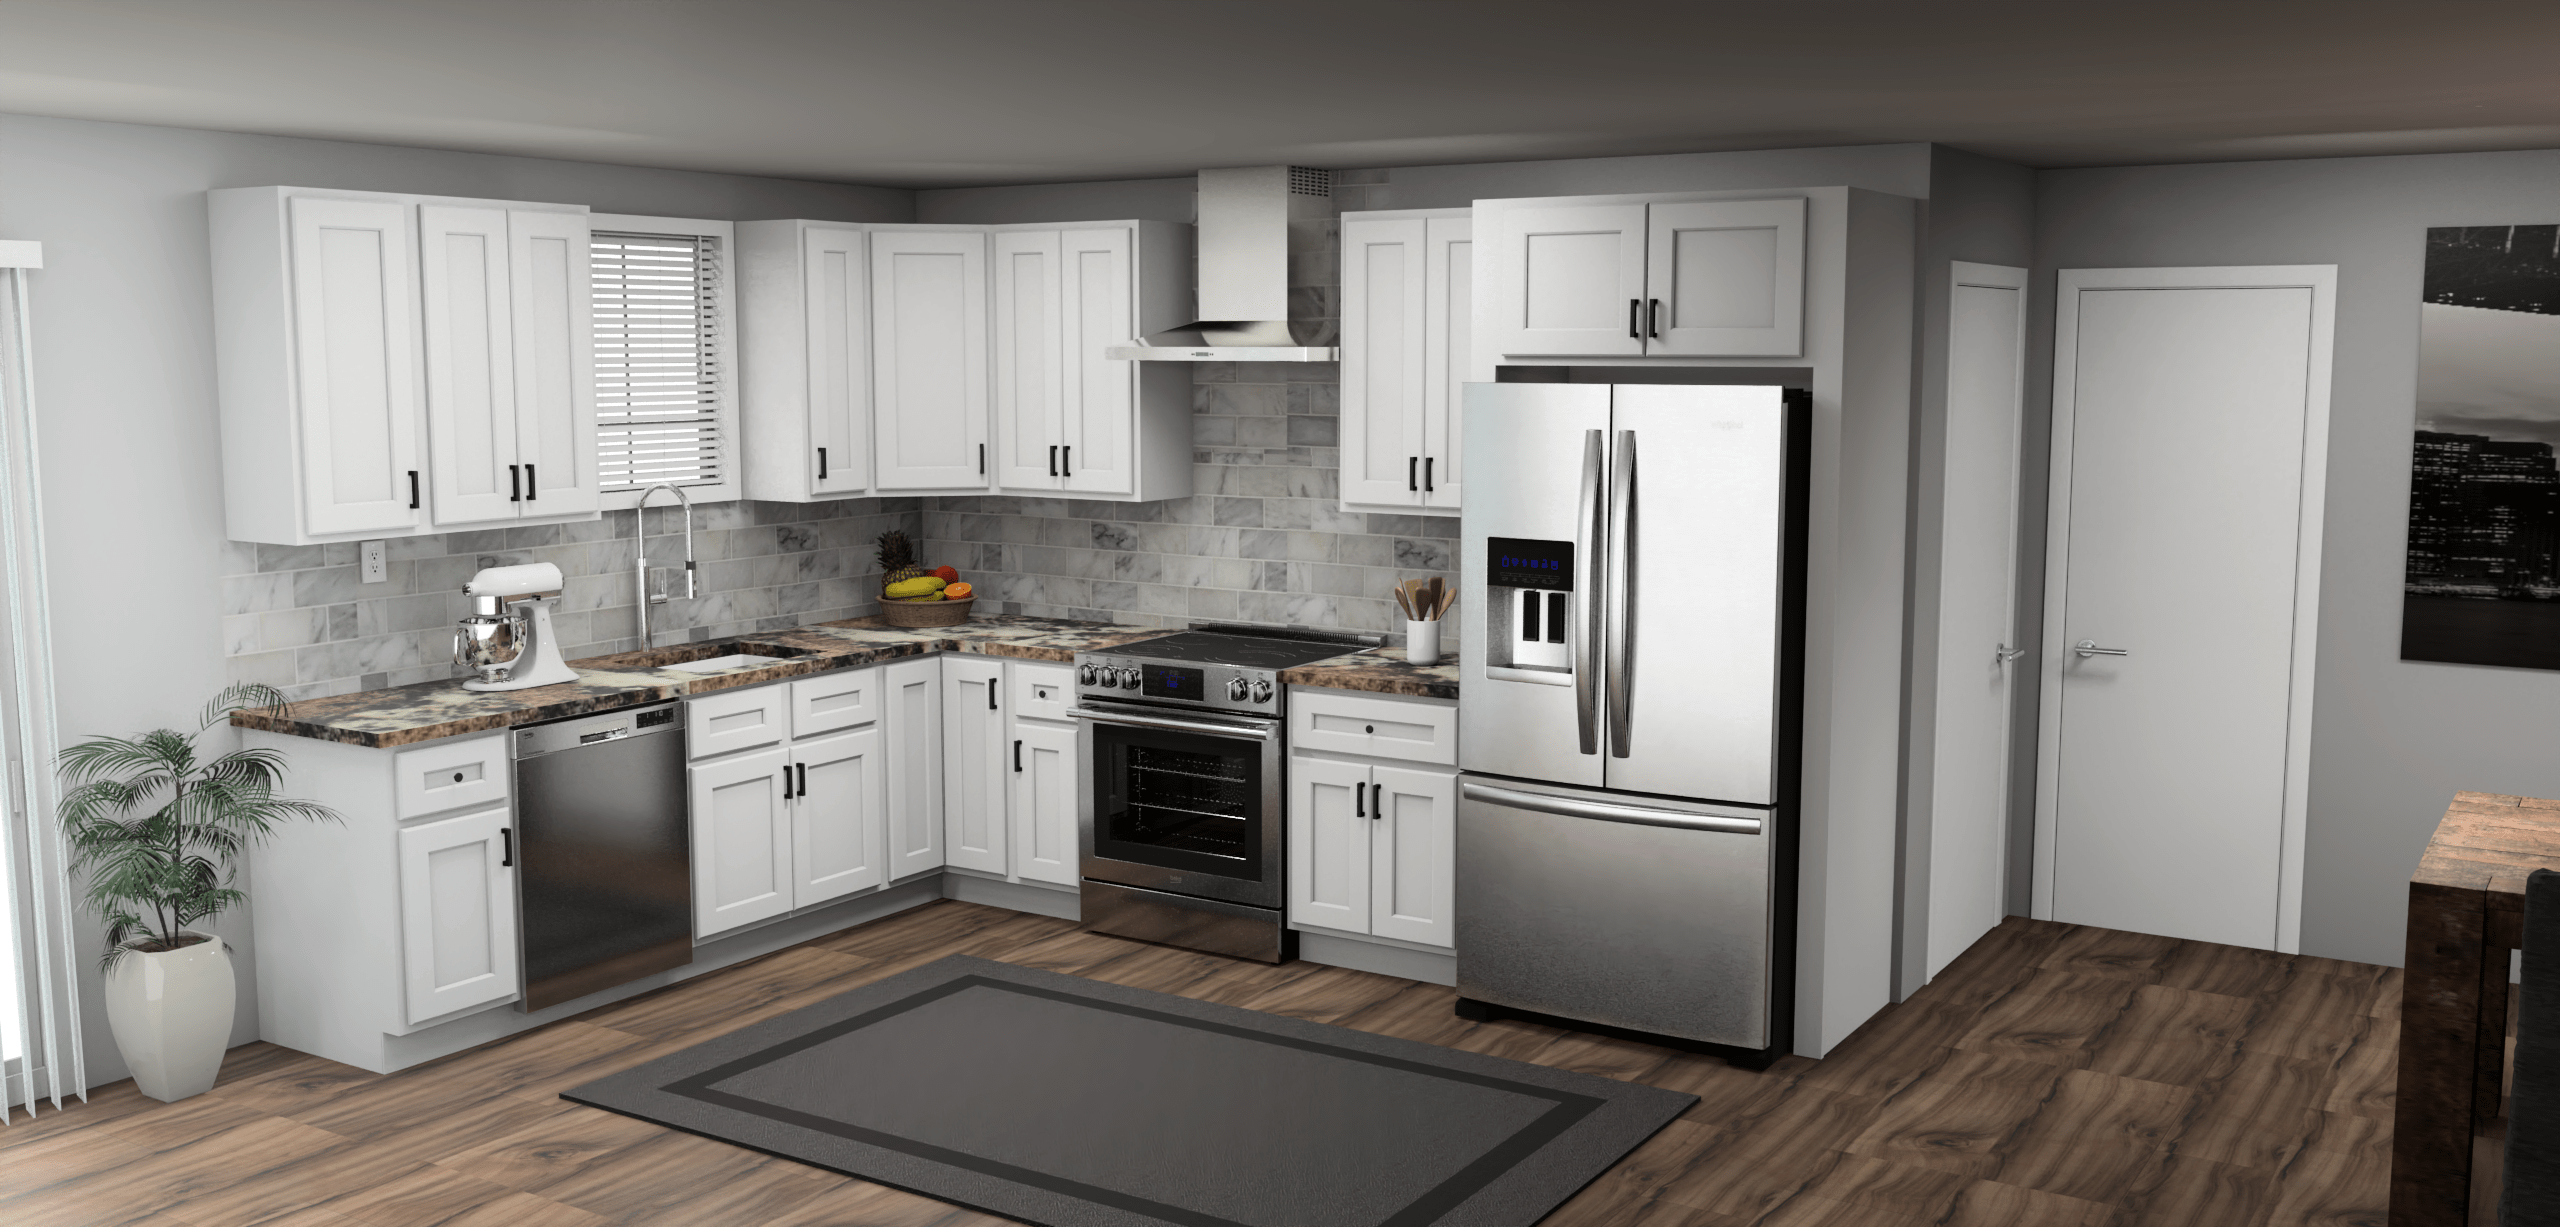 Fabuwood Quest Metro Frost 9 x 12 L Shaped Kitchen | Cabinets